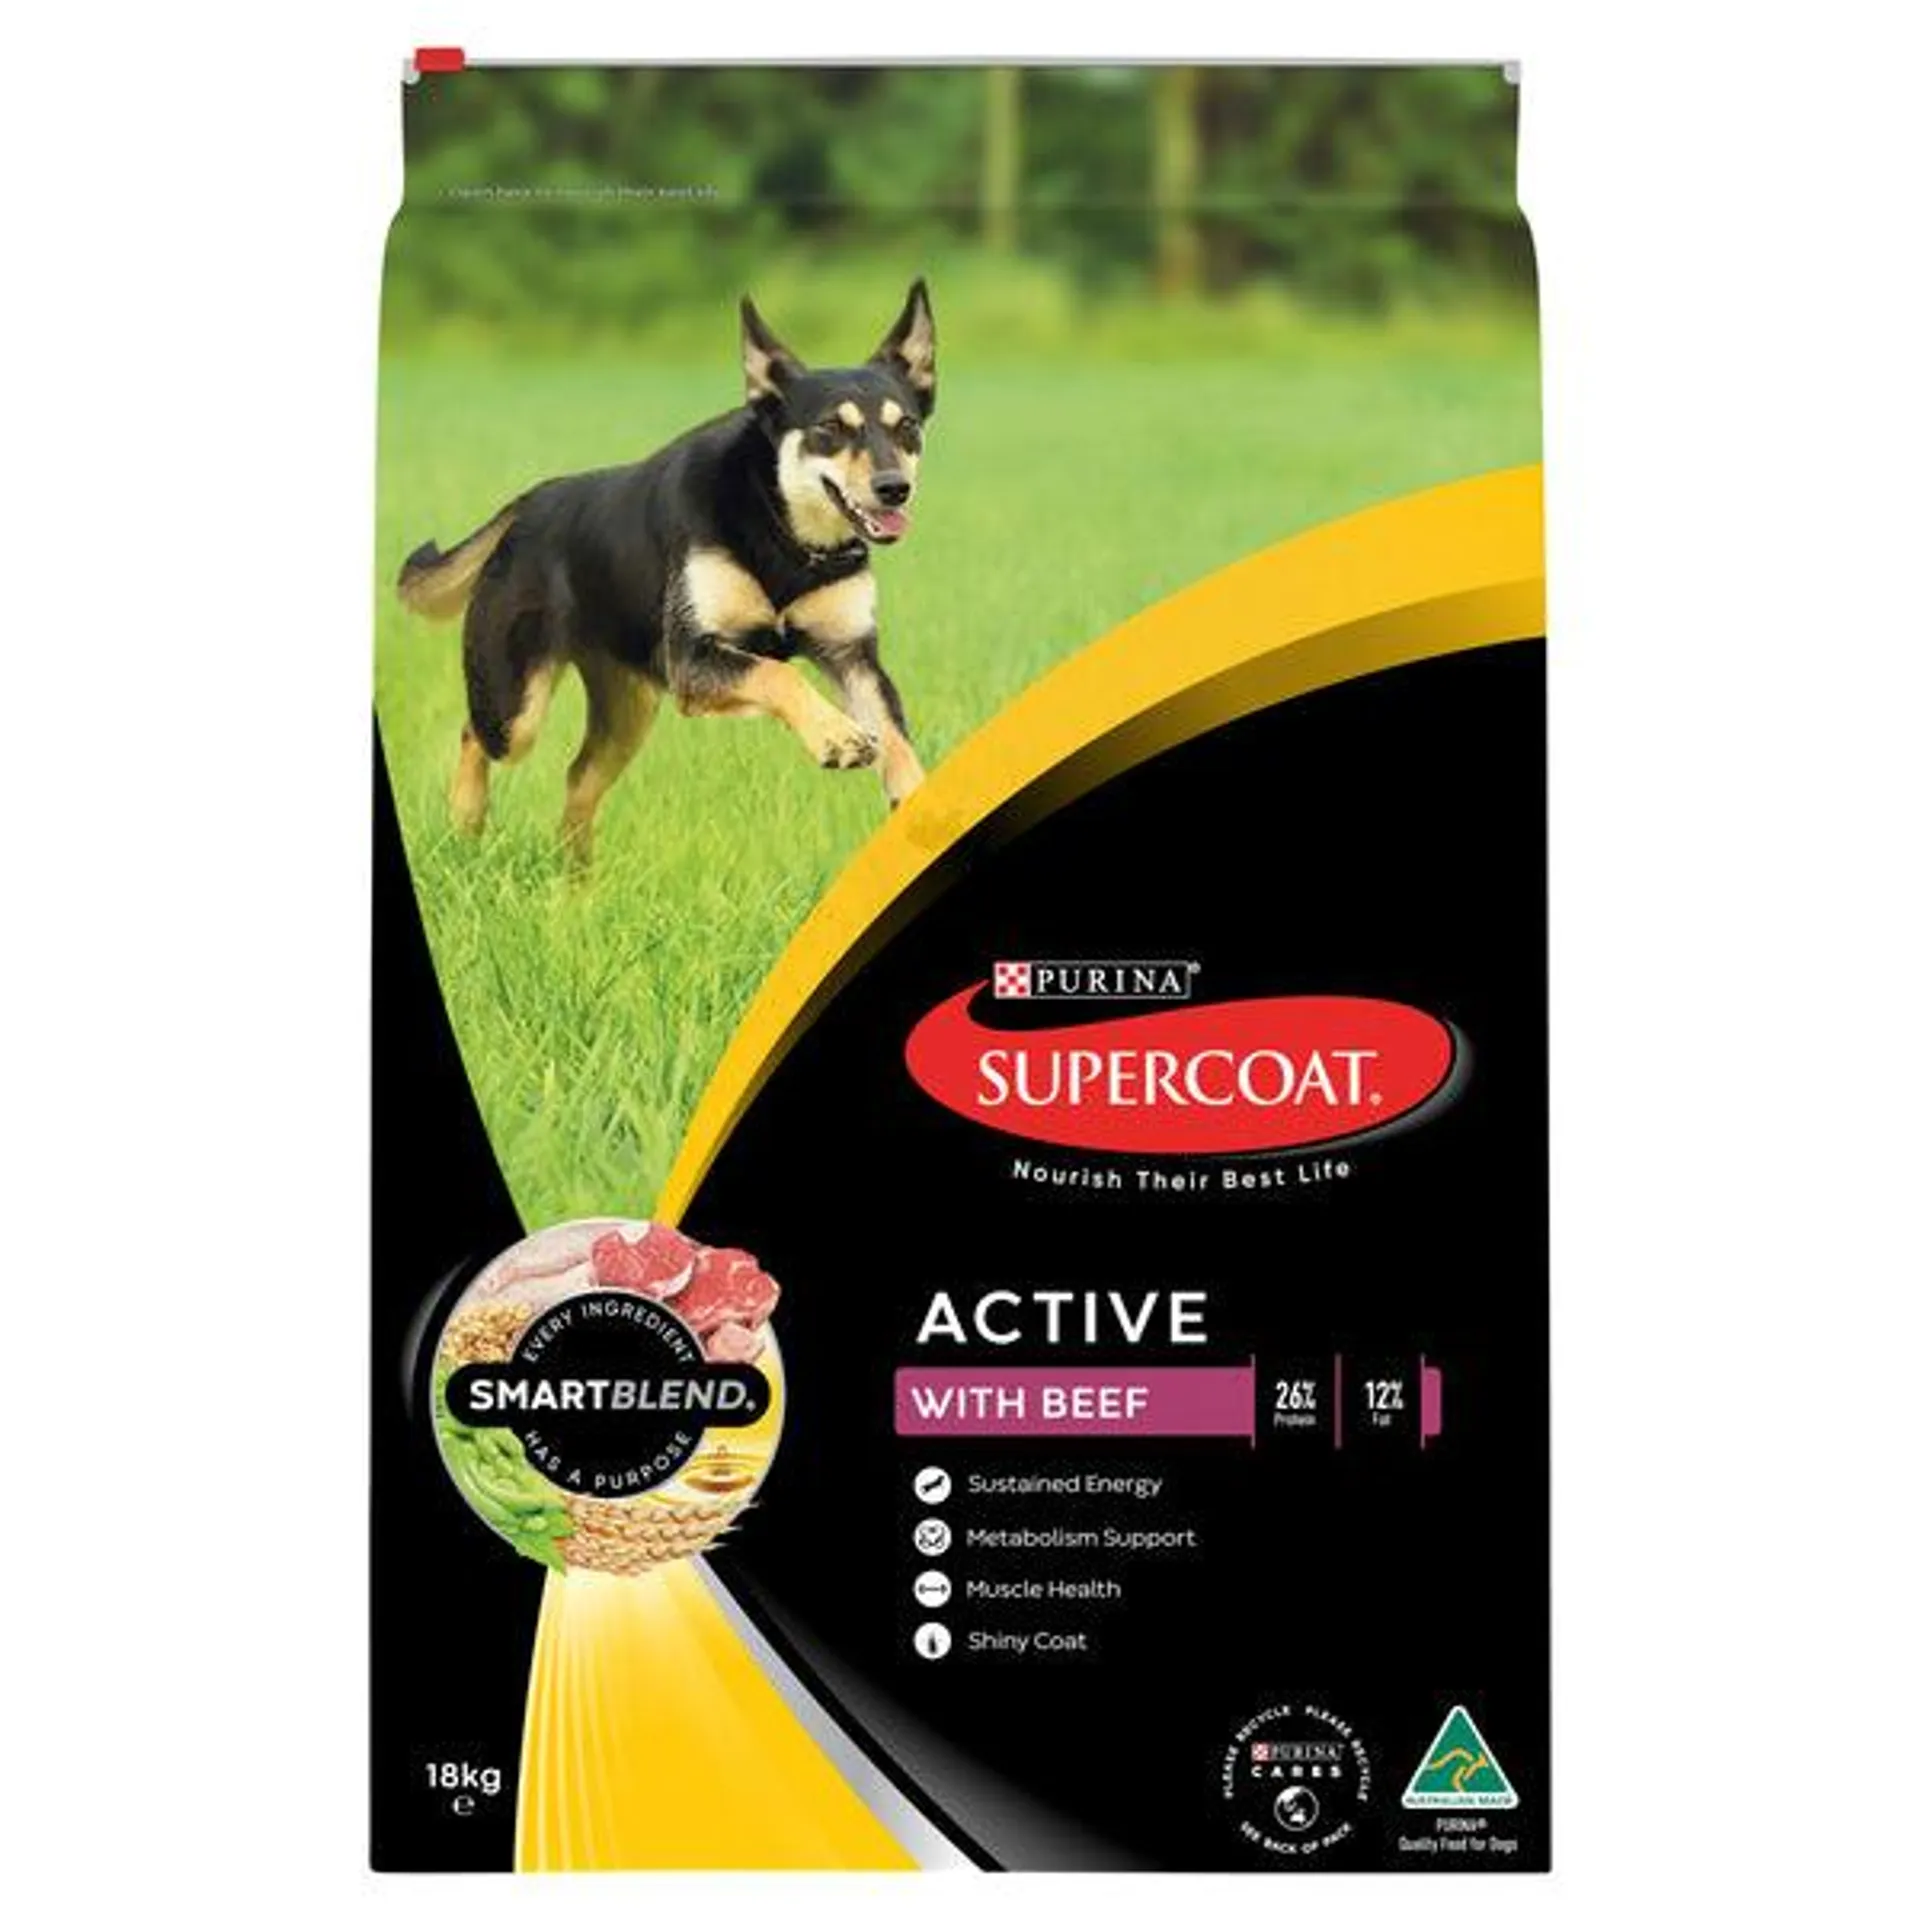 Supercoat - Active with Beef Dog Dry Food (18kg)